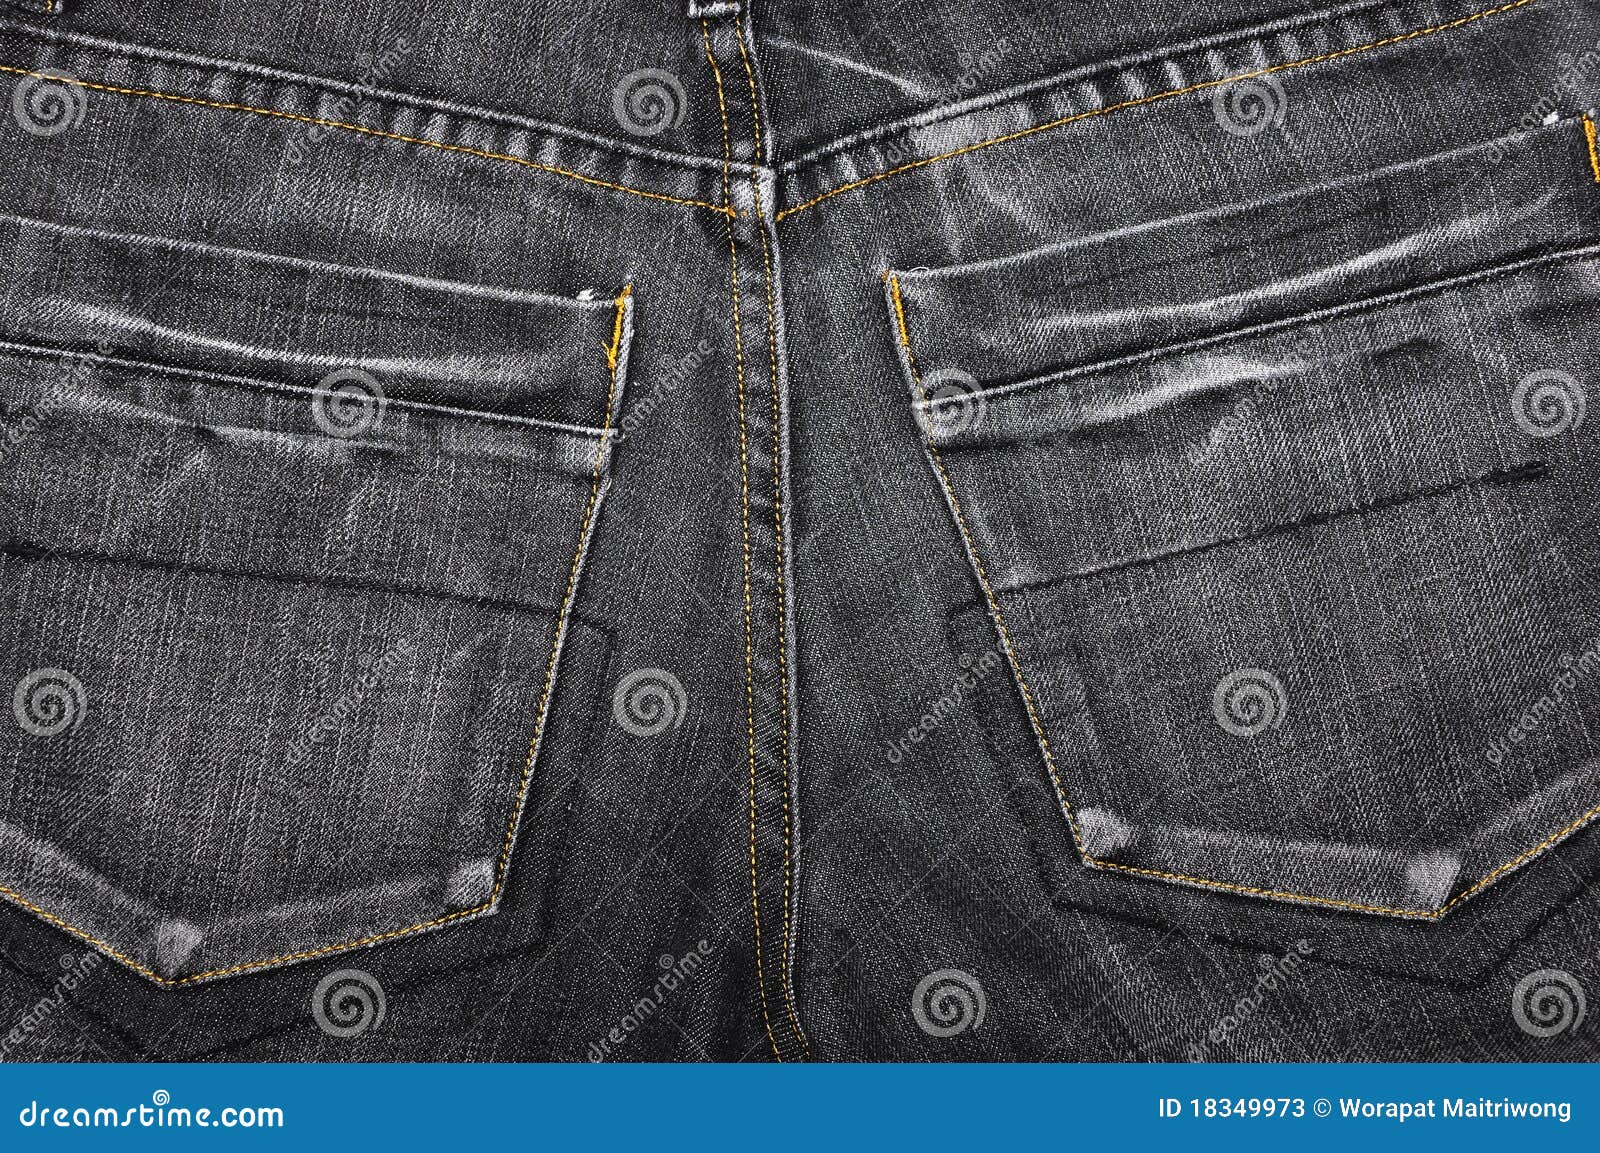 Jean texture stock image. Image of background, color - 18349973